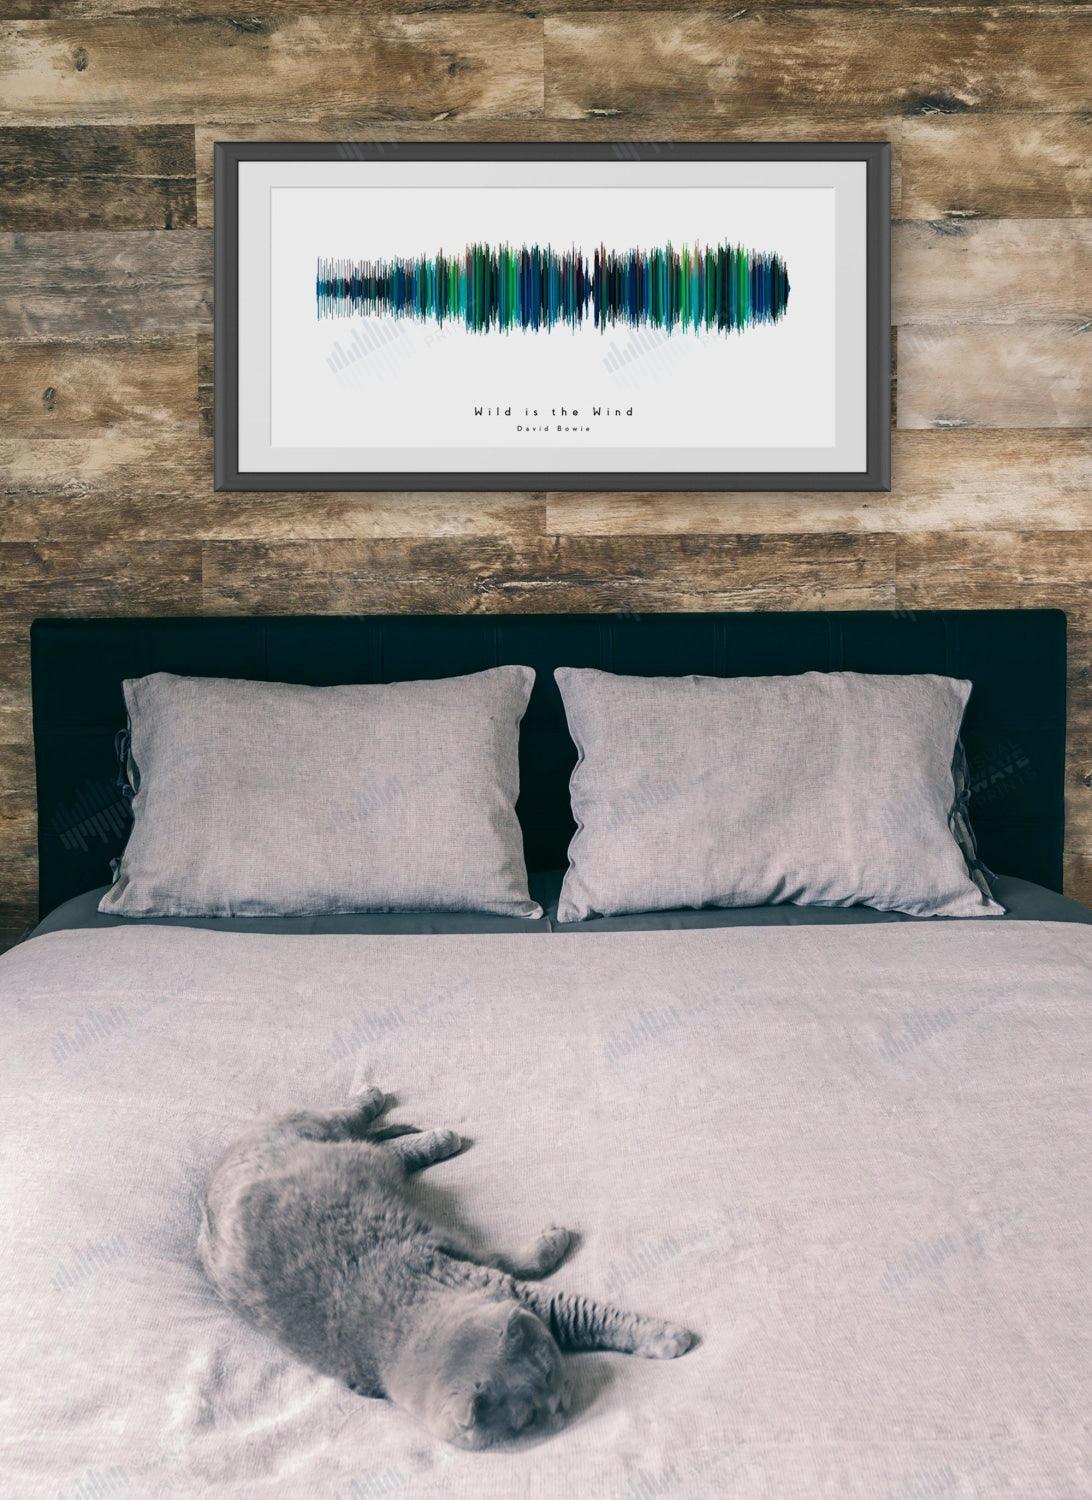 Wild is the Wind by David Bowie - Visual Wave Prints